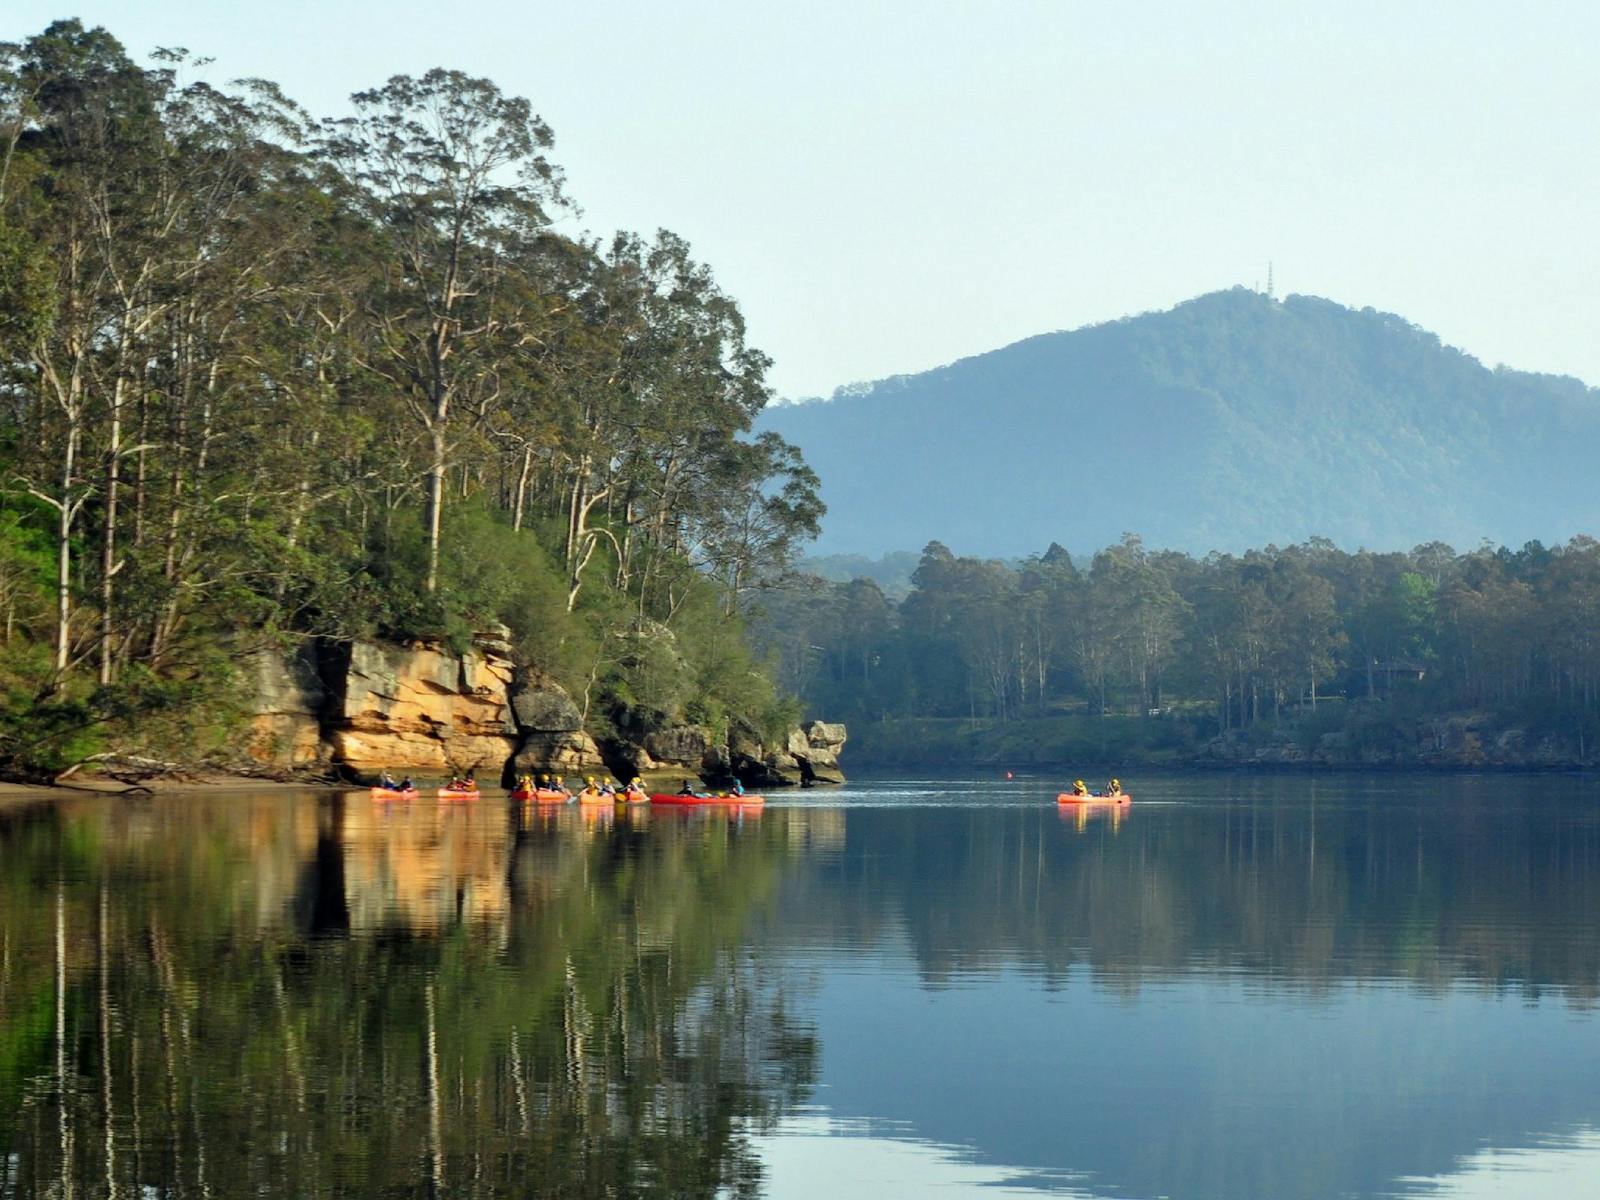 Paddle the Shoalhaven River on your own craft or hire one,  there's a lot of river to explore!